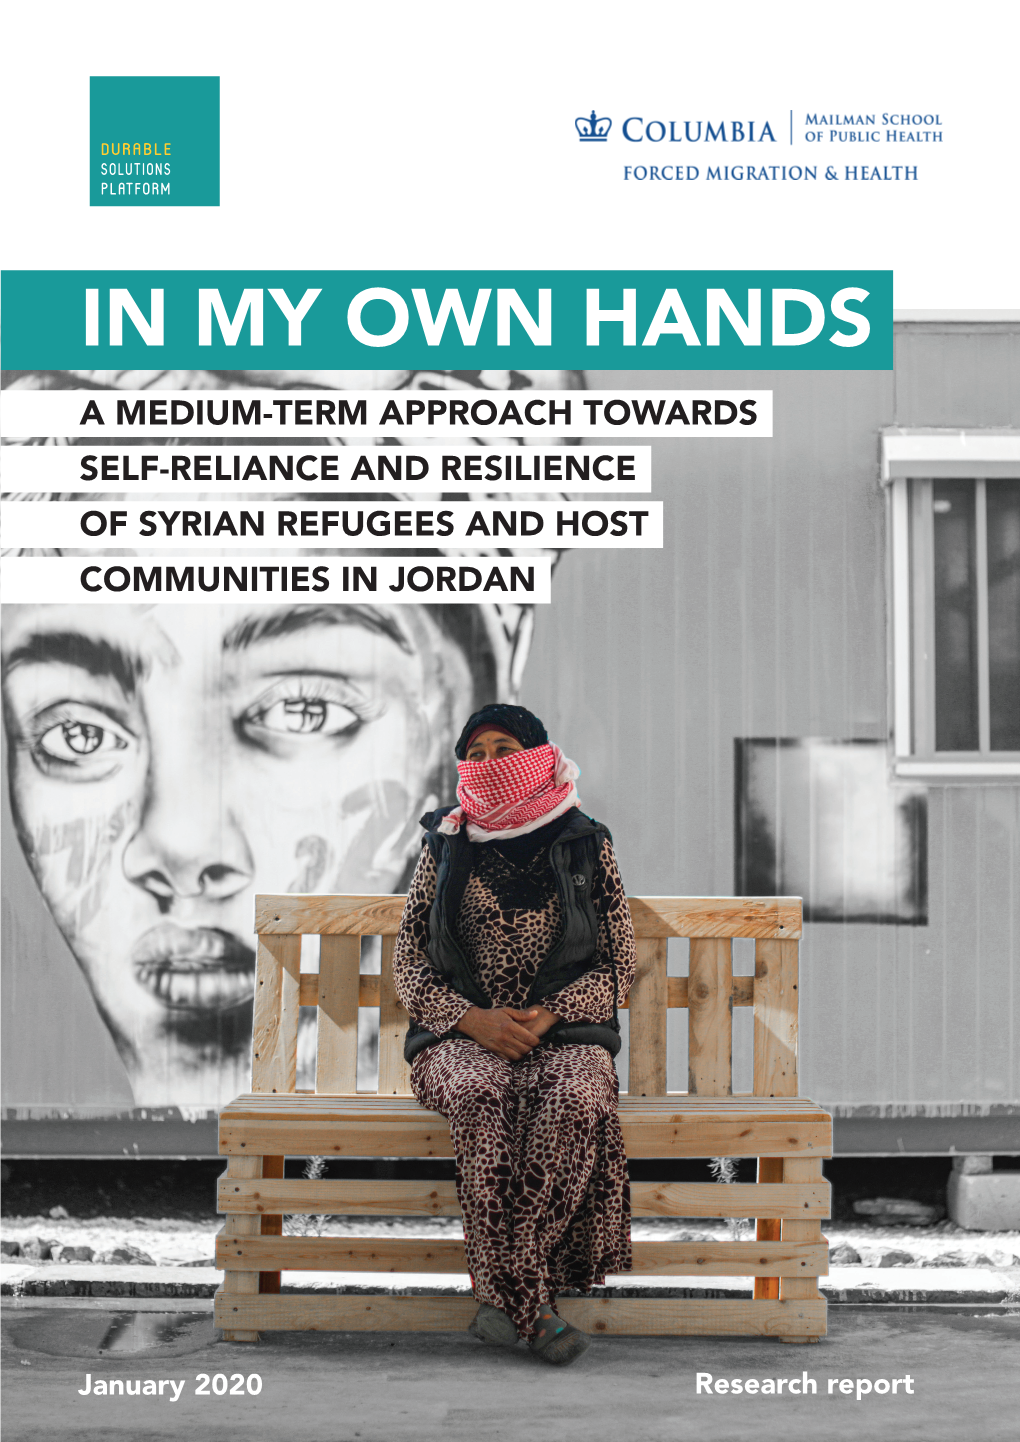 “In My Own Hands”: a Medium-Term Approach Towards Self-Reliance and Resilience of Syrian Refugees and Host Communities in Jordan